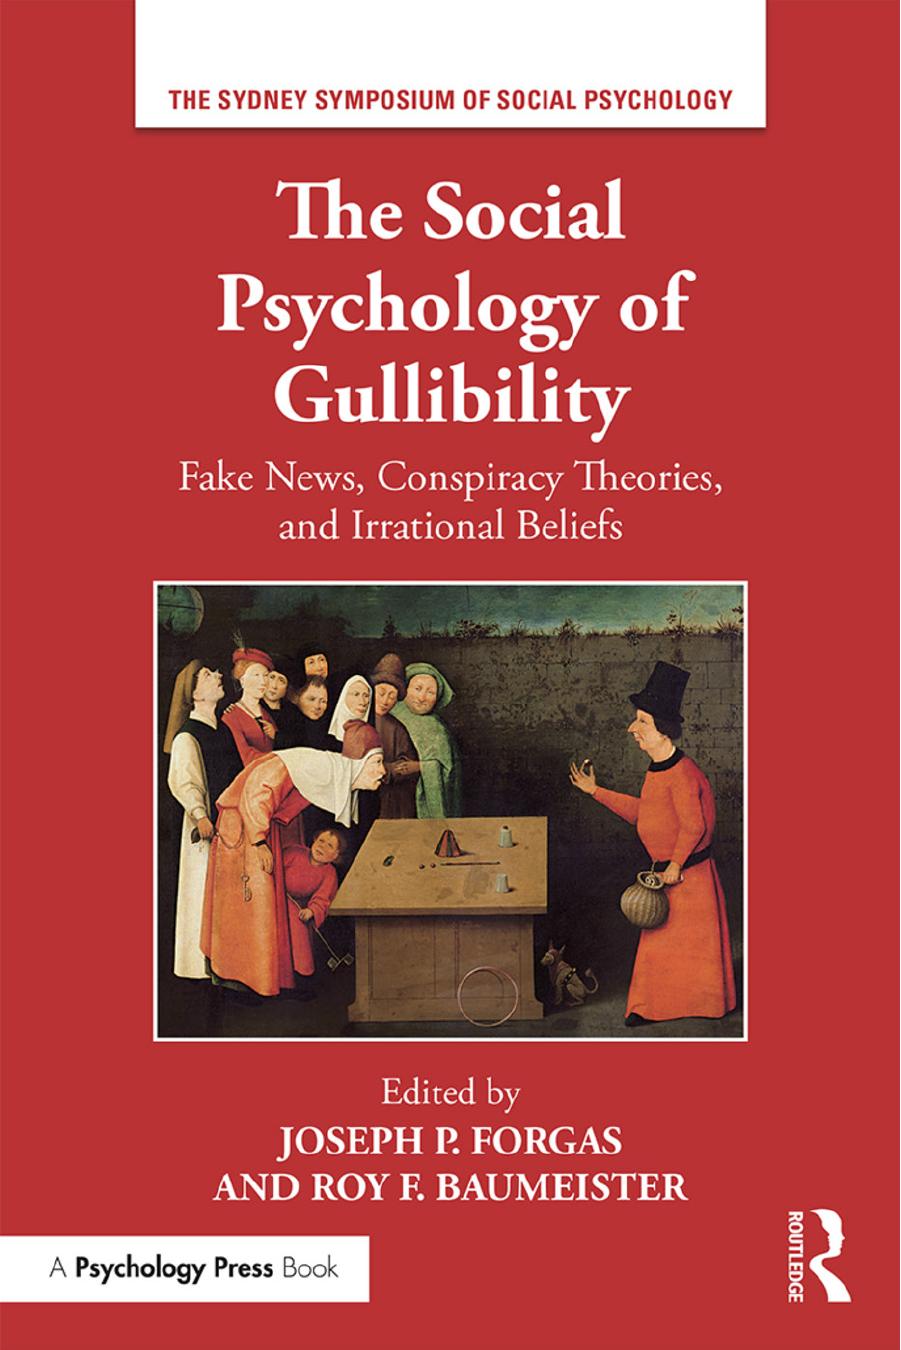 The Social Psychology of Gullibility; Fake News, Conspiracy Theories, and Irrational Beliefs